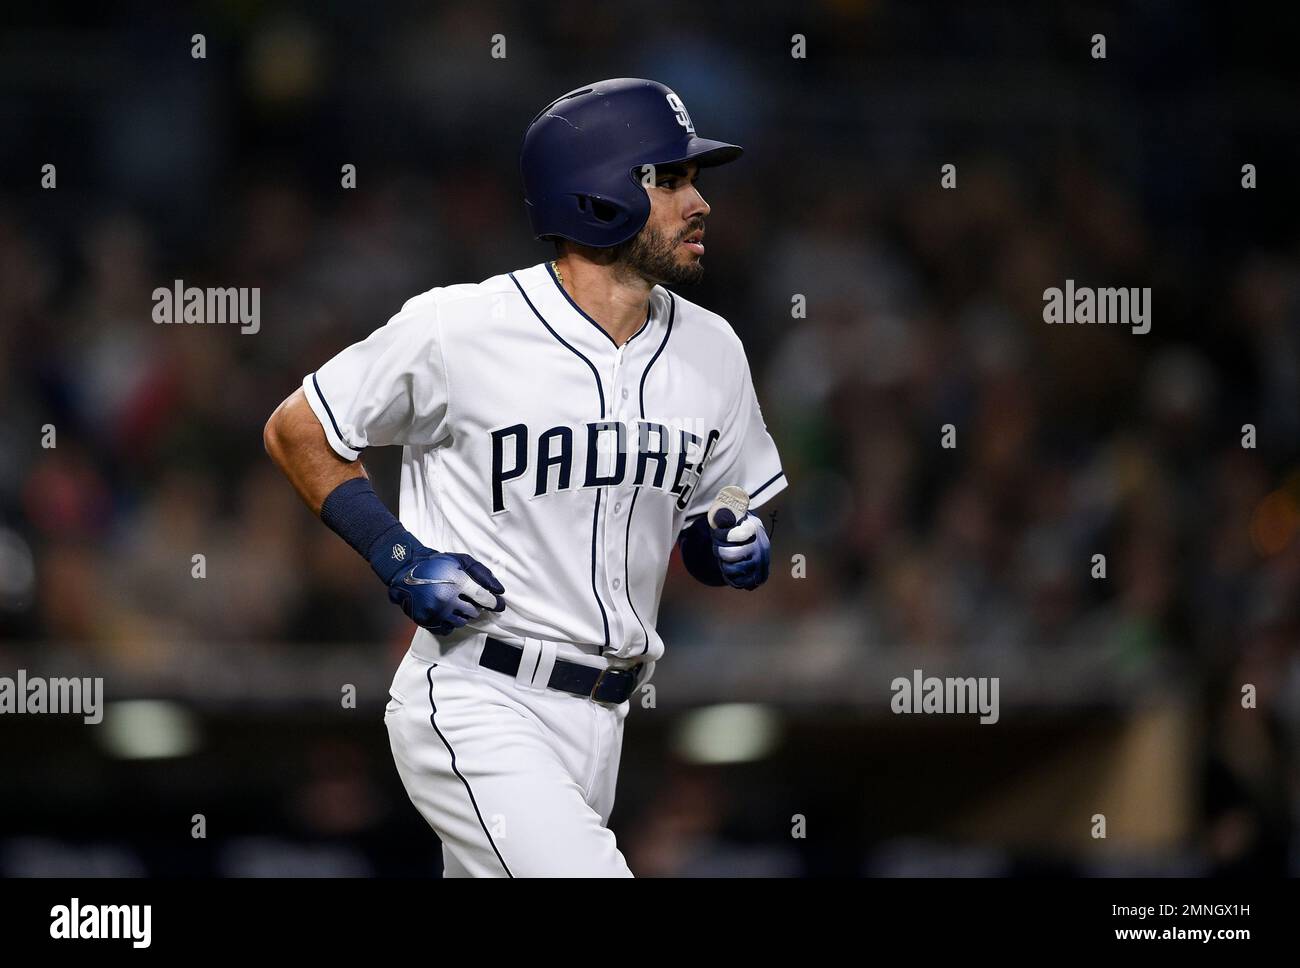 San Diego Padres' Carlos Asuaje reacts after striking out on a